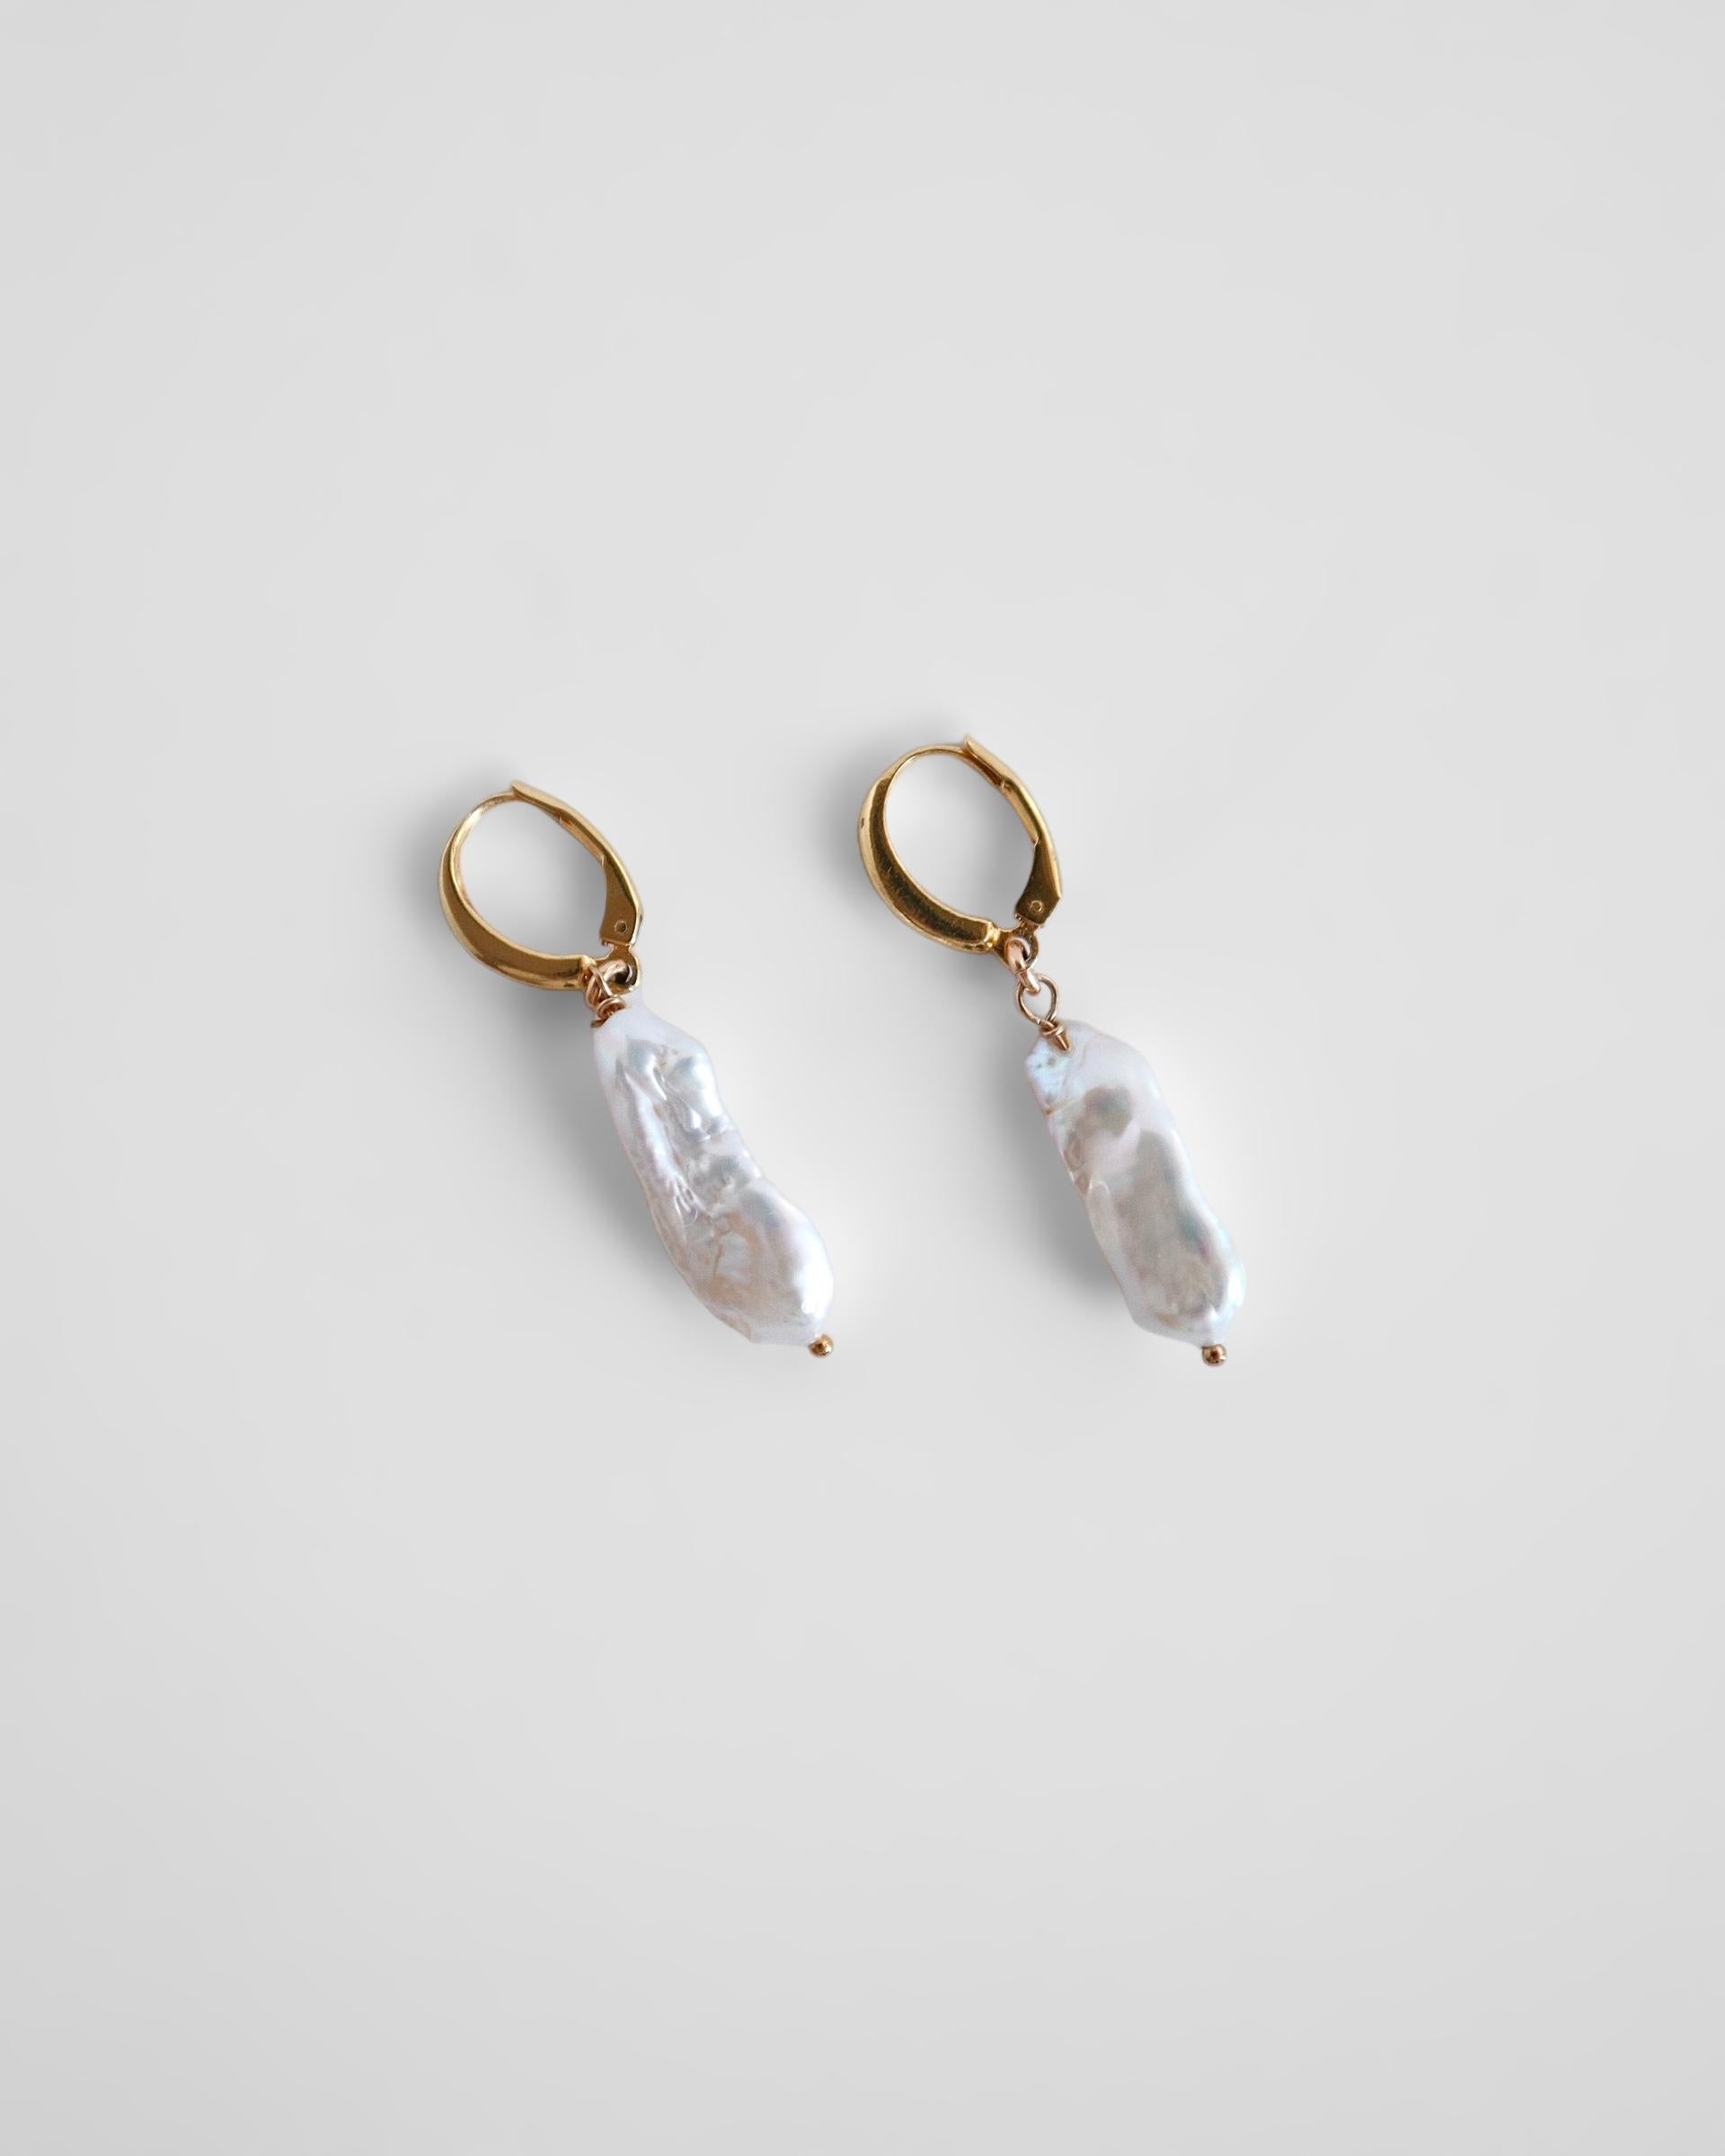 Elevate your look with our modern take on pearls. The Gaia earrings exude subtle elegance.

Ships within 2 weeks 

4 month warranty

Details:
- 40mm long approximately
- 14K gold filled lever back hooks
- Freshwater Keshi pearls 20mm height